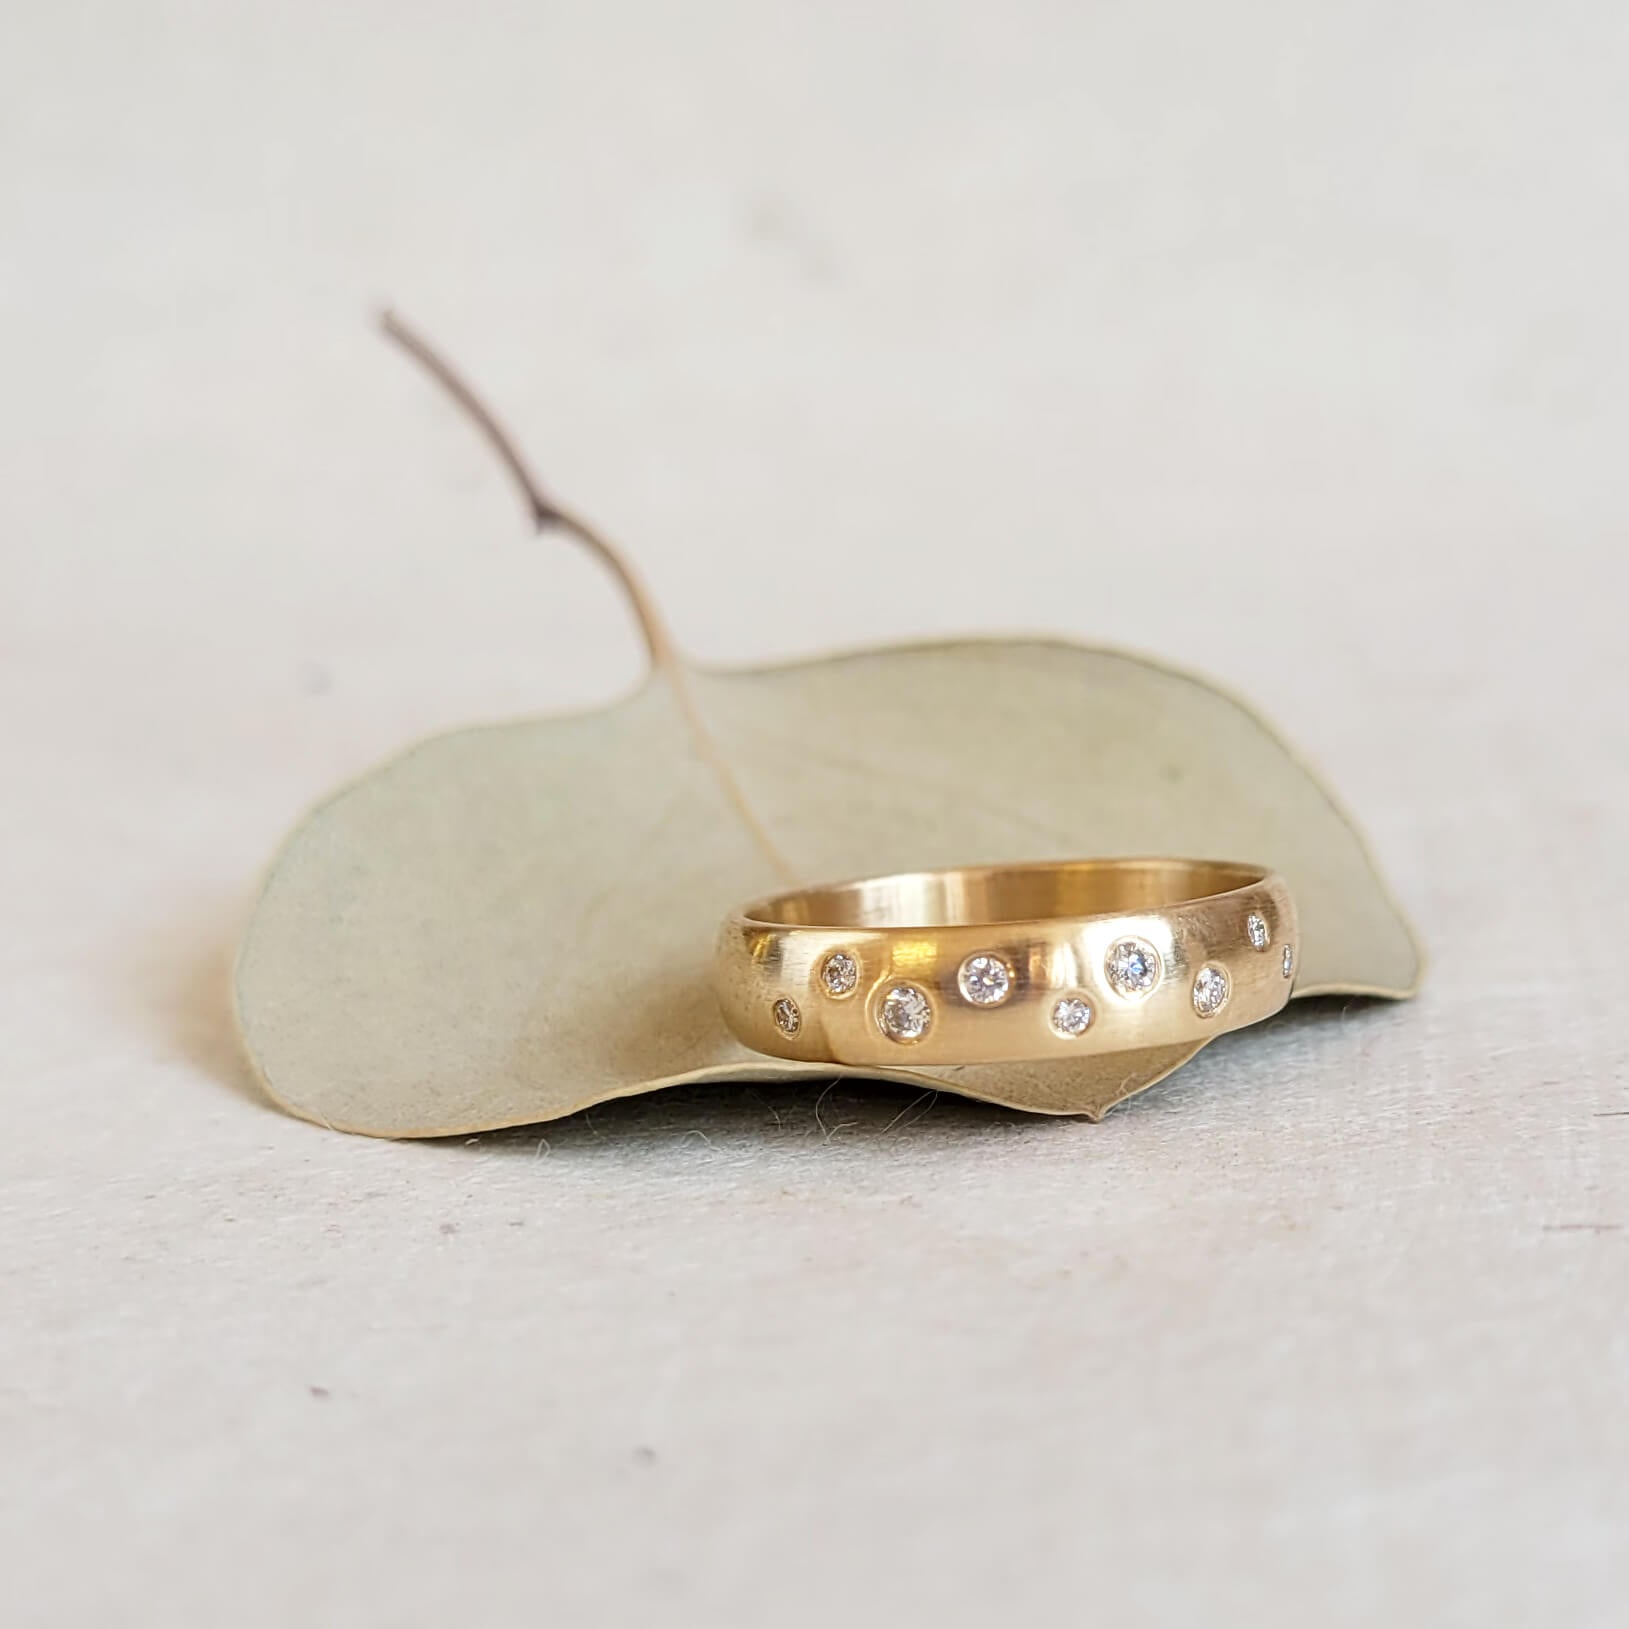 5mm Band in 14k Yellow Gold with Scattered White Diamonds